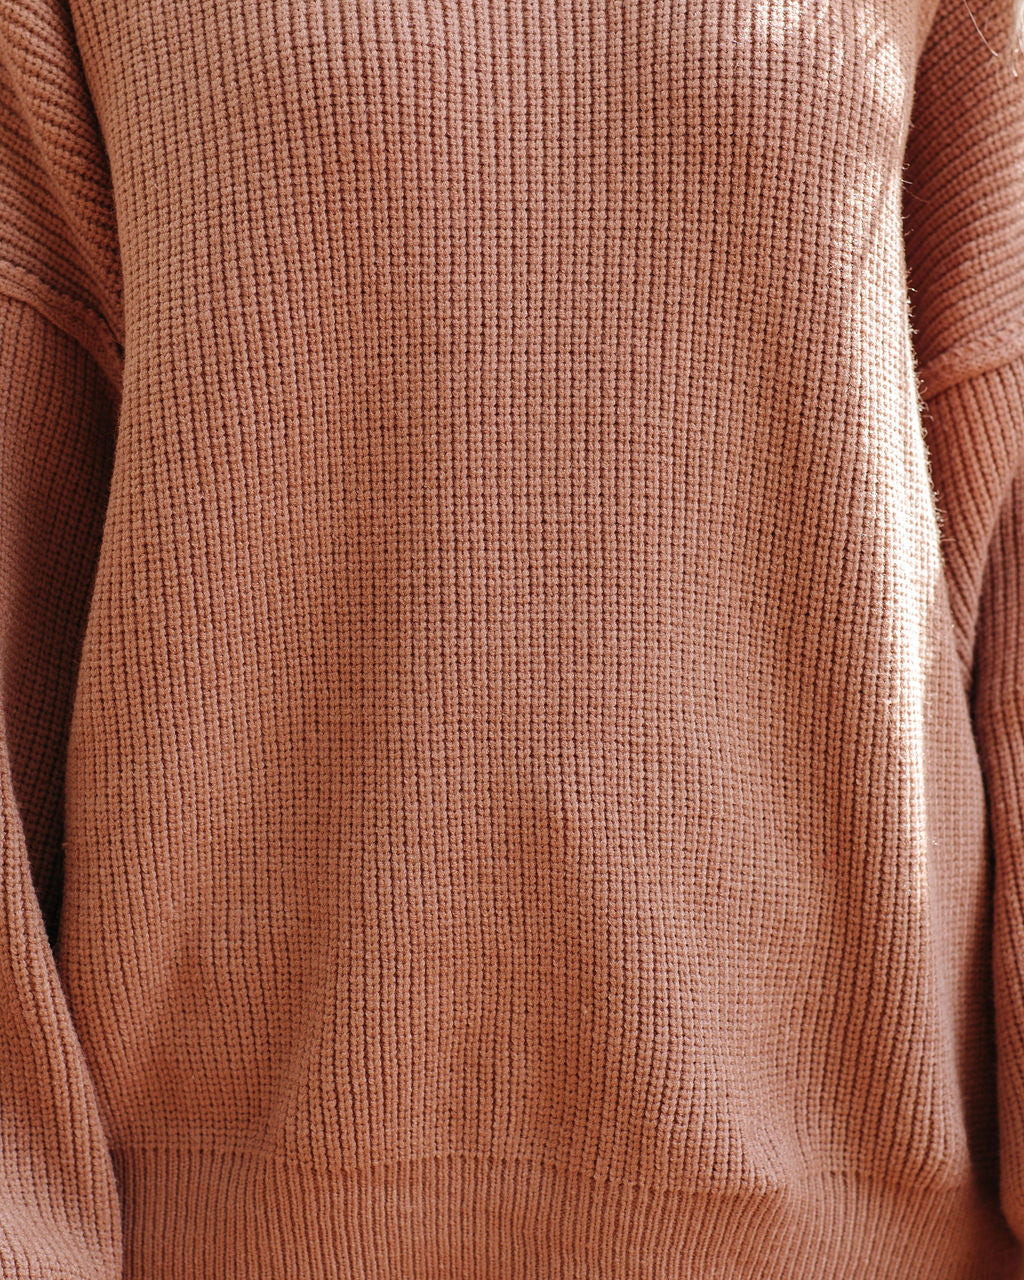 Claus For Celebration Boat Neck Sweater - Tan